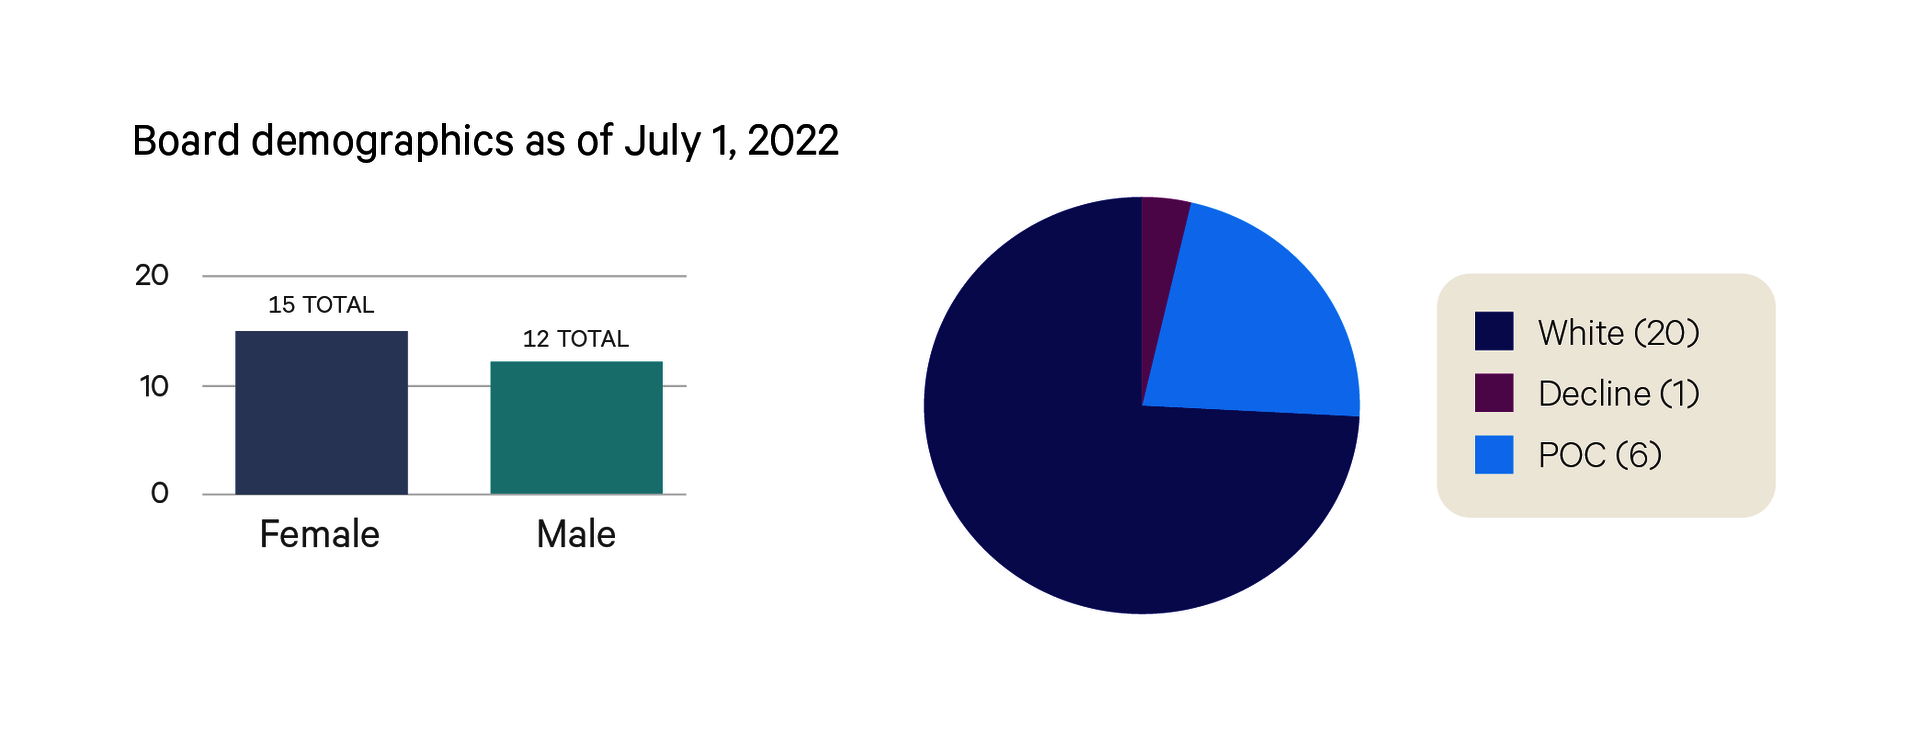 Bar graph besides a pie chart, collectively titled “Board demographics as of July 1, 2022”. The bar graph shows that there are 15 total females and 12 total males. The pie chart label reads  “White: 20, Decline: 1, POC: 6”.